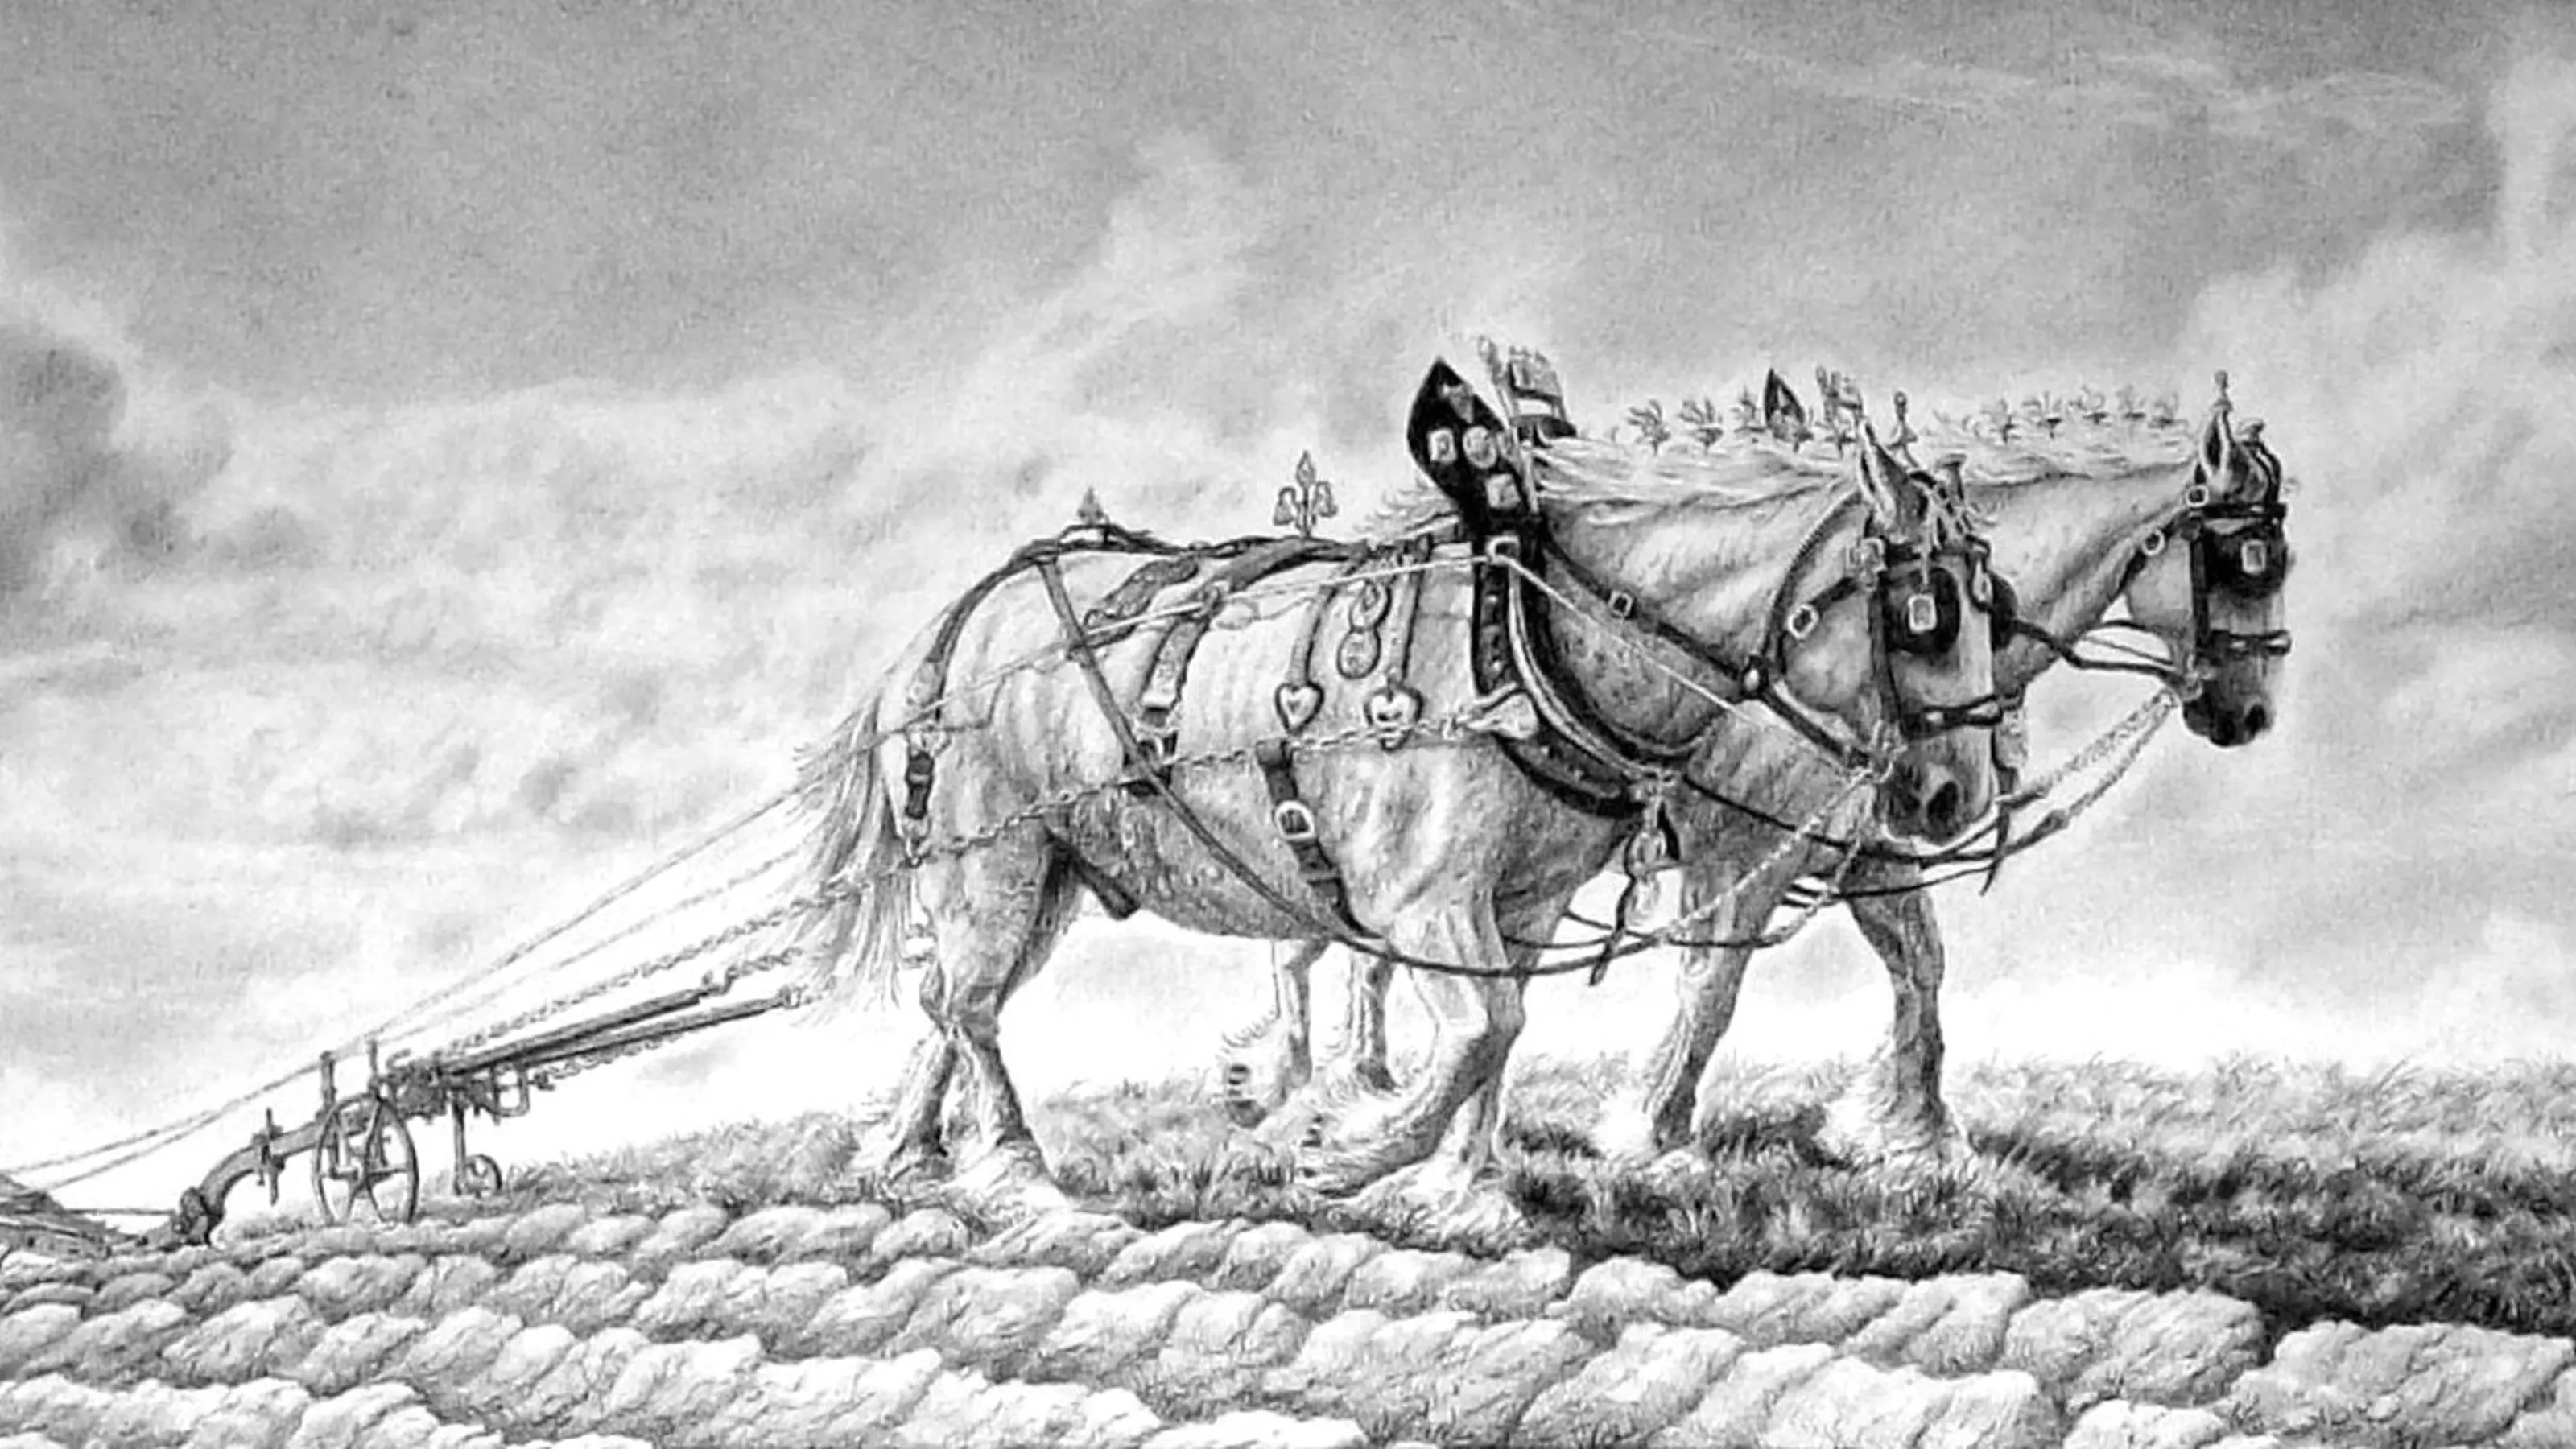 A drawing of a horse by Stephen Yorke